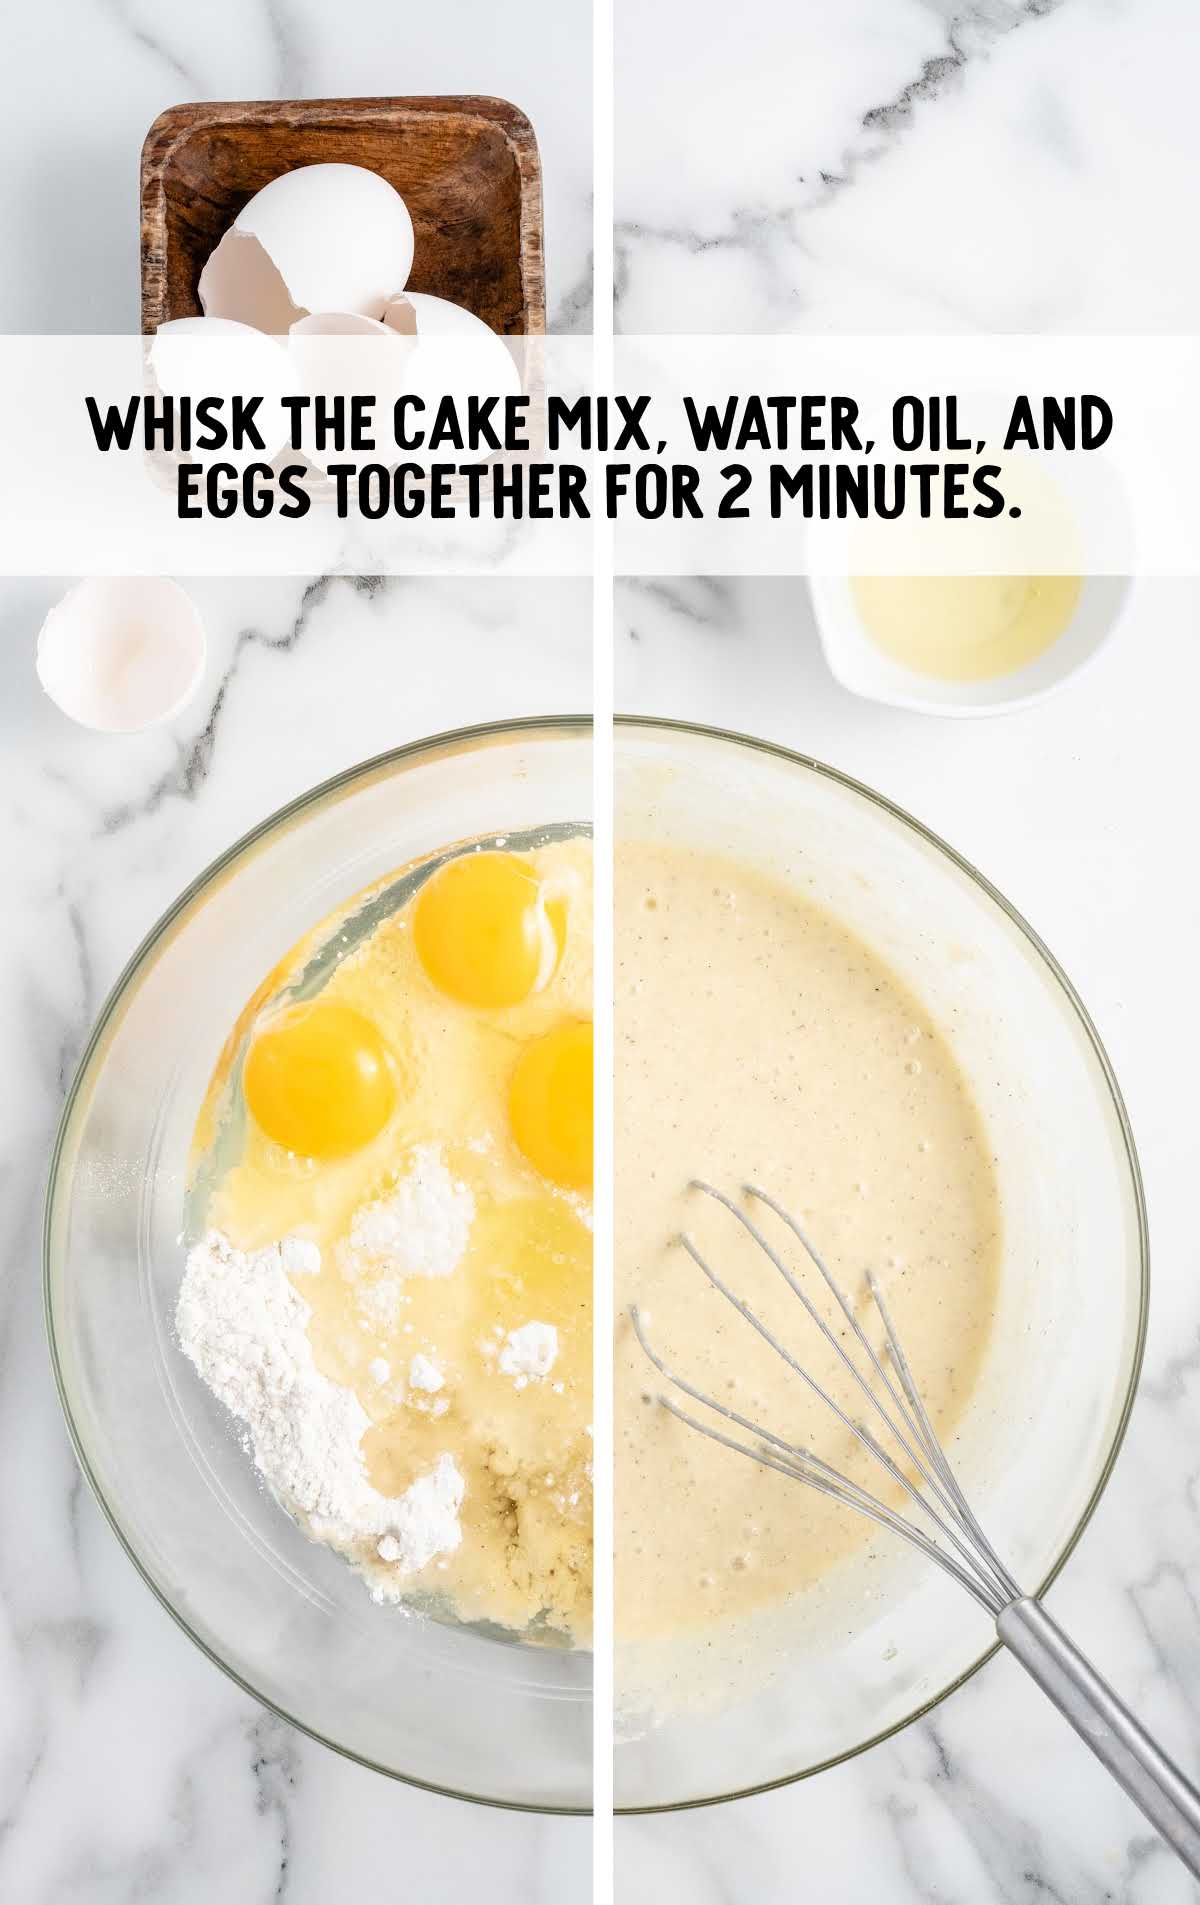 cake mix, water, oil, and eggs whisked